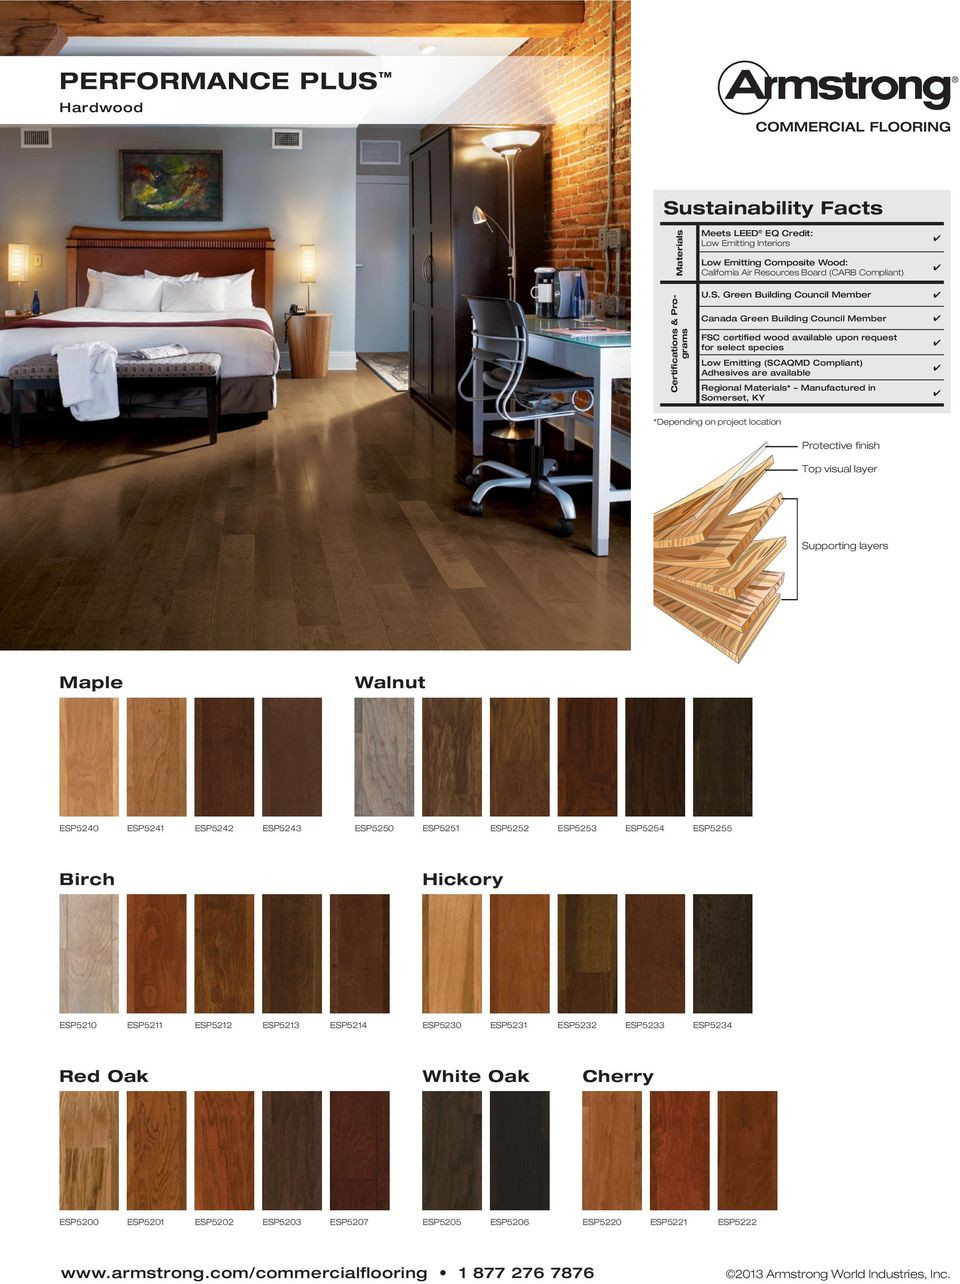 14 Lovable Bruce Lock and Fold Hardwood Flooring Reviews 2024 free download bruce lock and fold hardwood flooring reviews of performance plus installation maintenance tip sheet pdf pertaining to green building council member canada green building council member fsc 